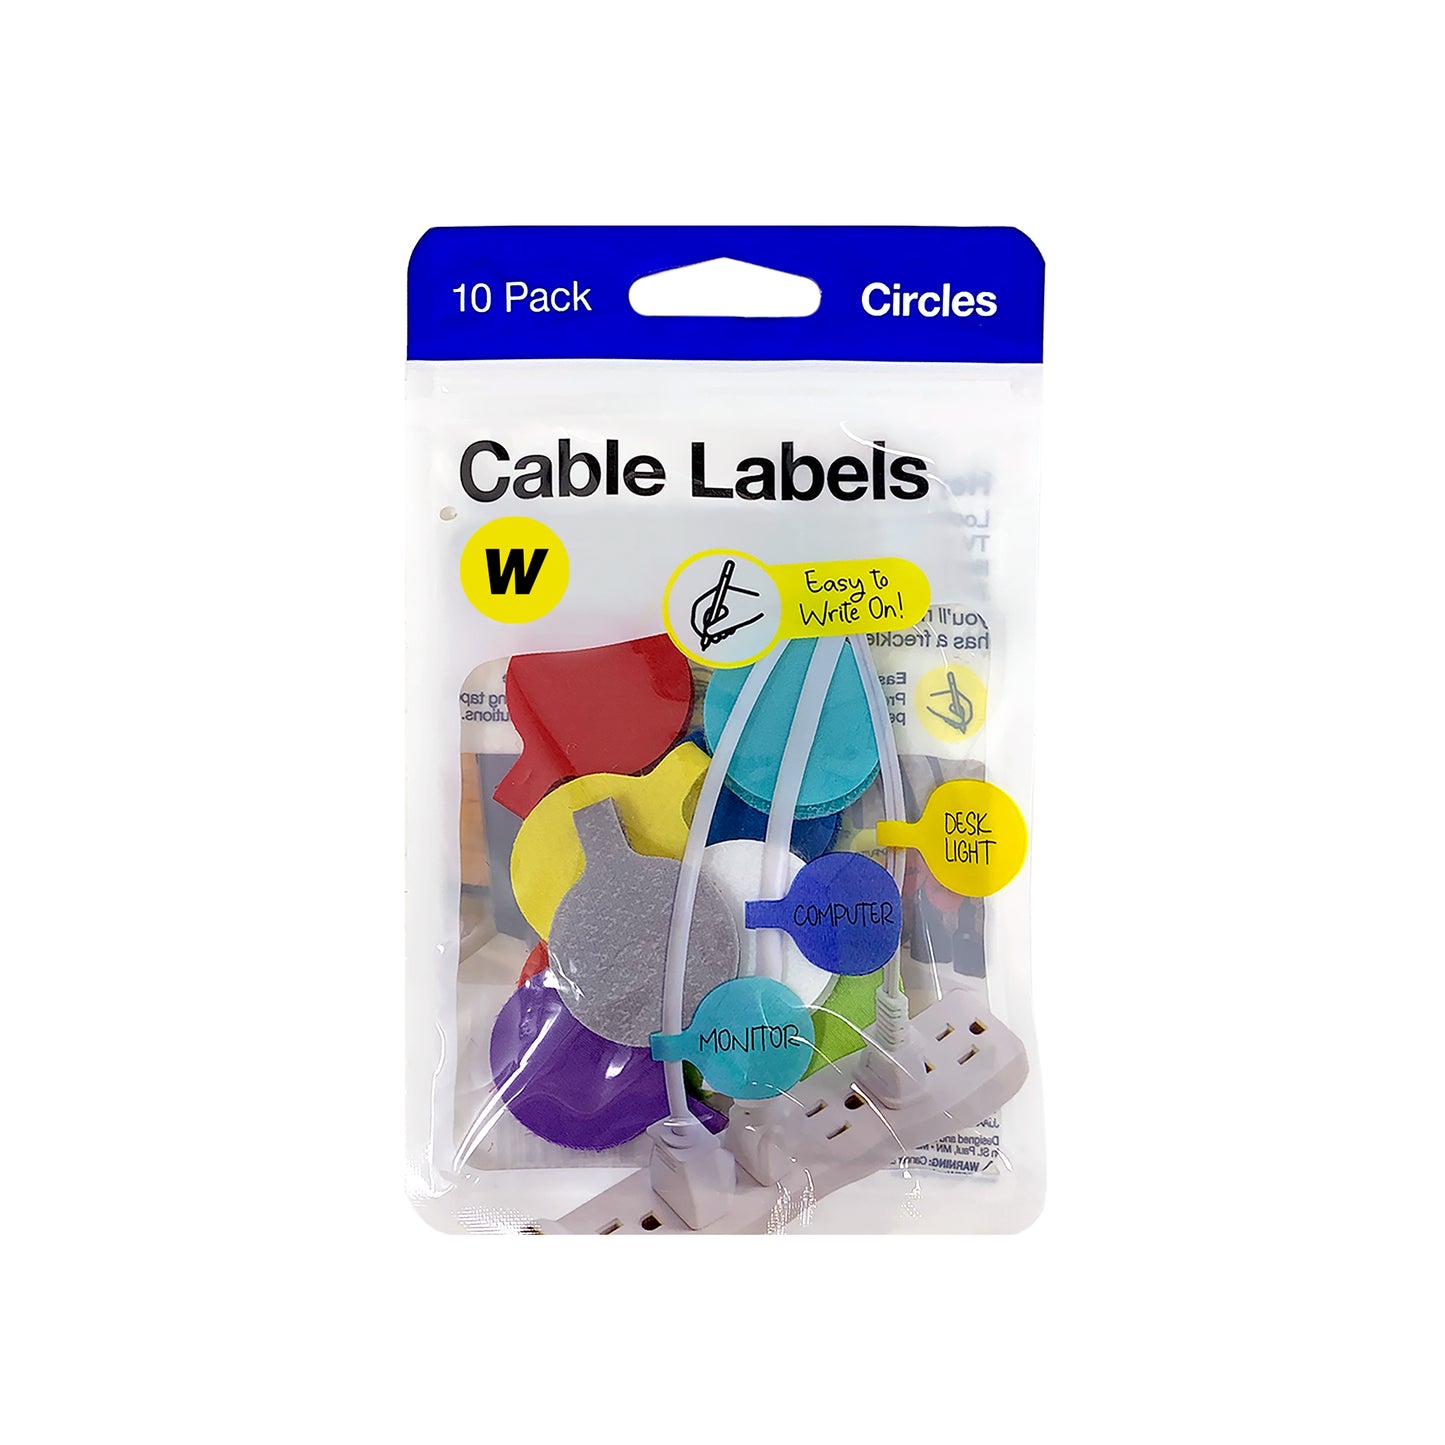 Cable Labels - Circles (10-Pack)